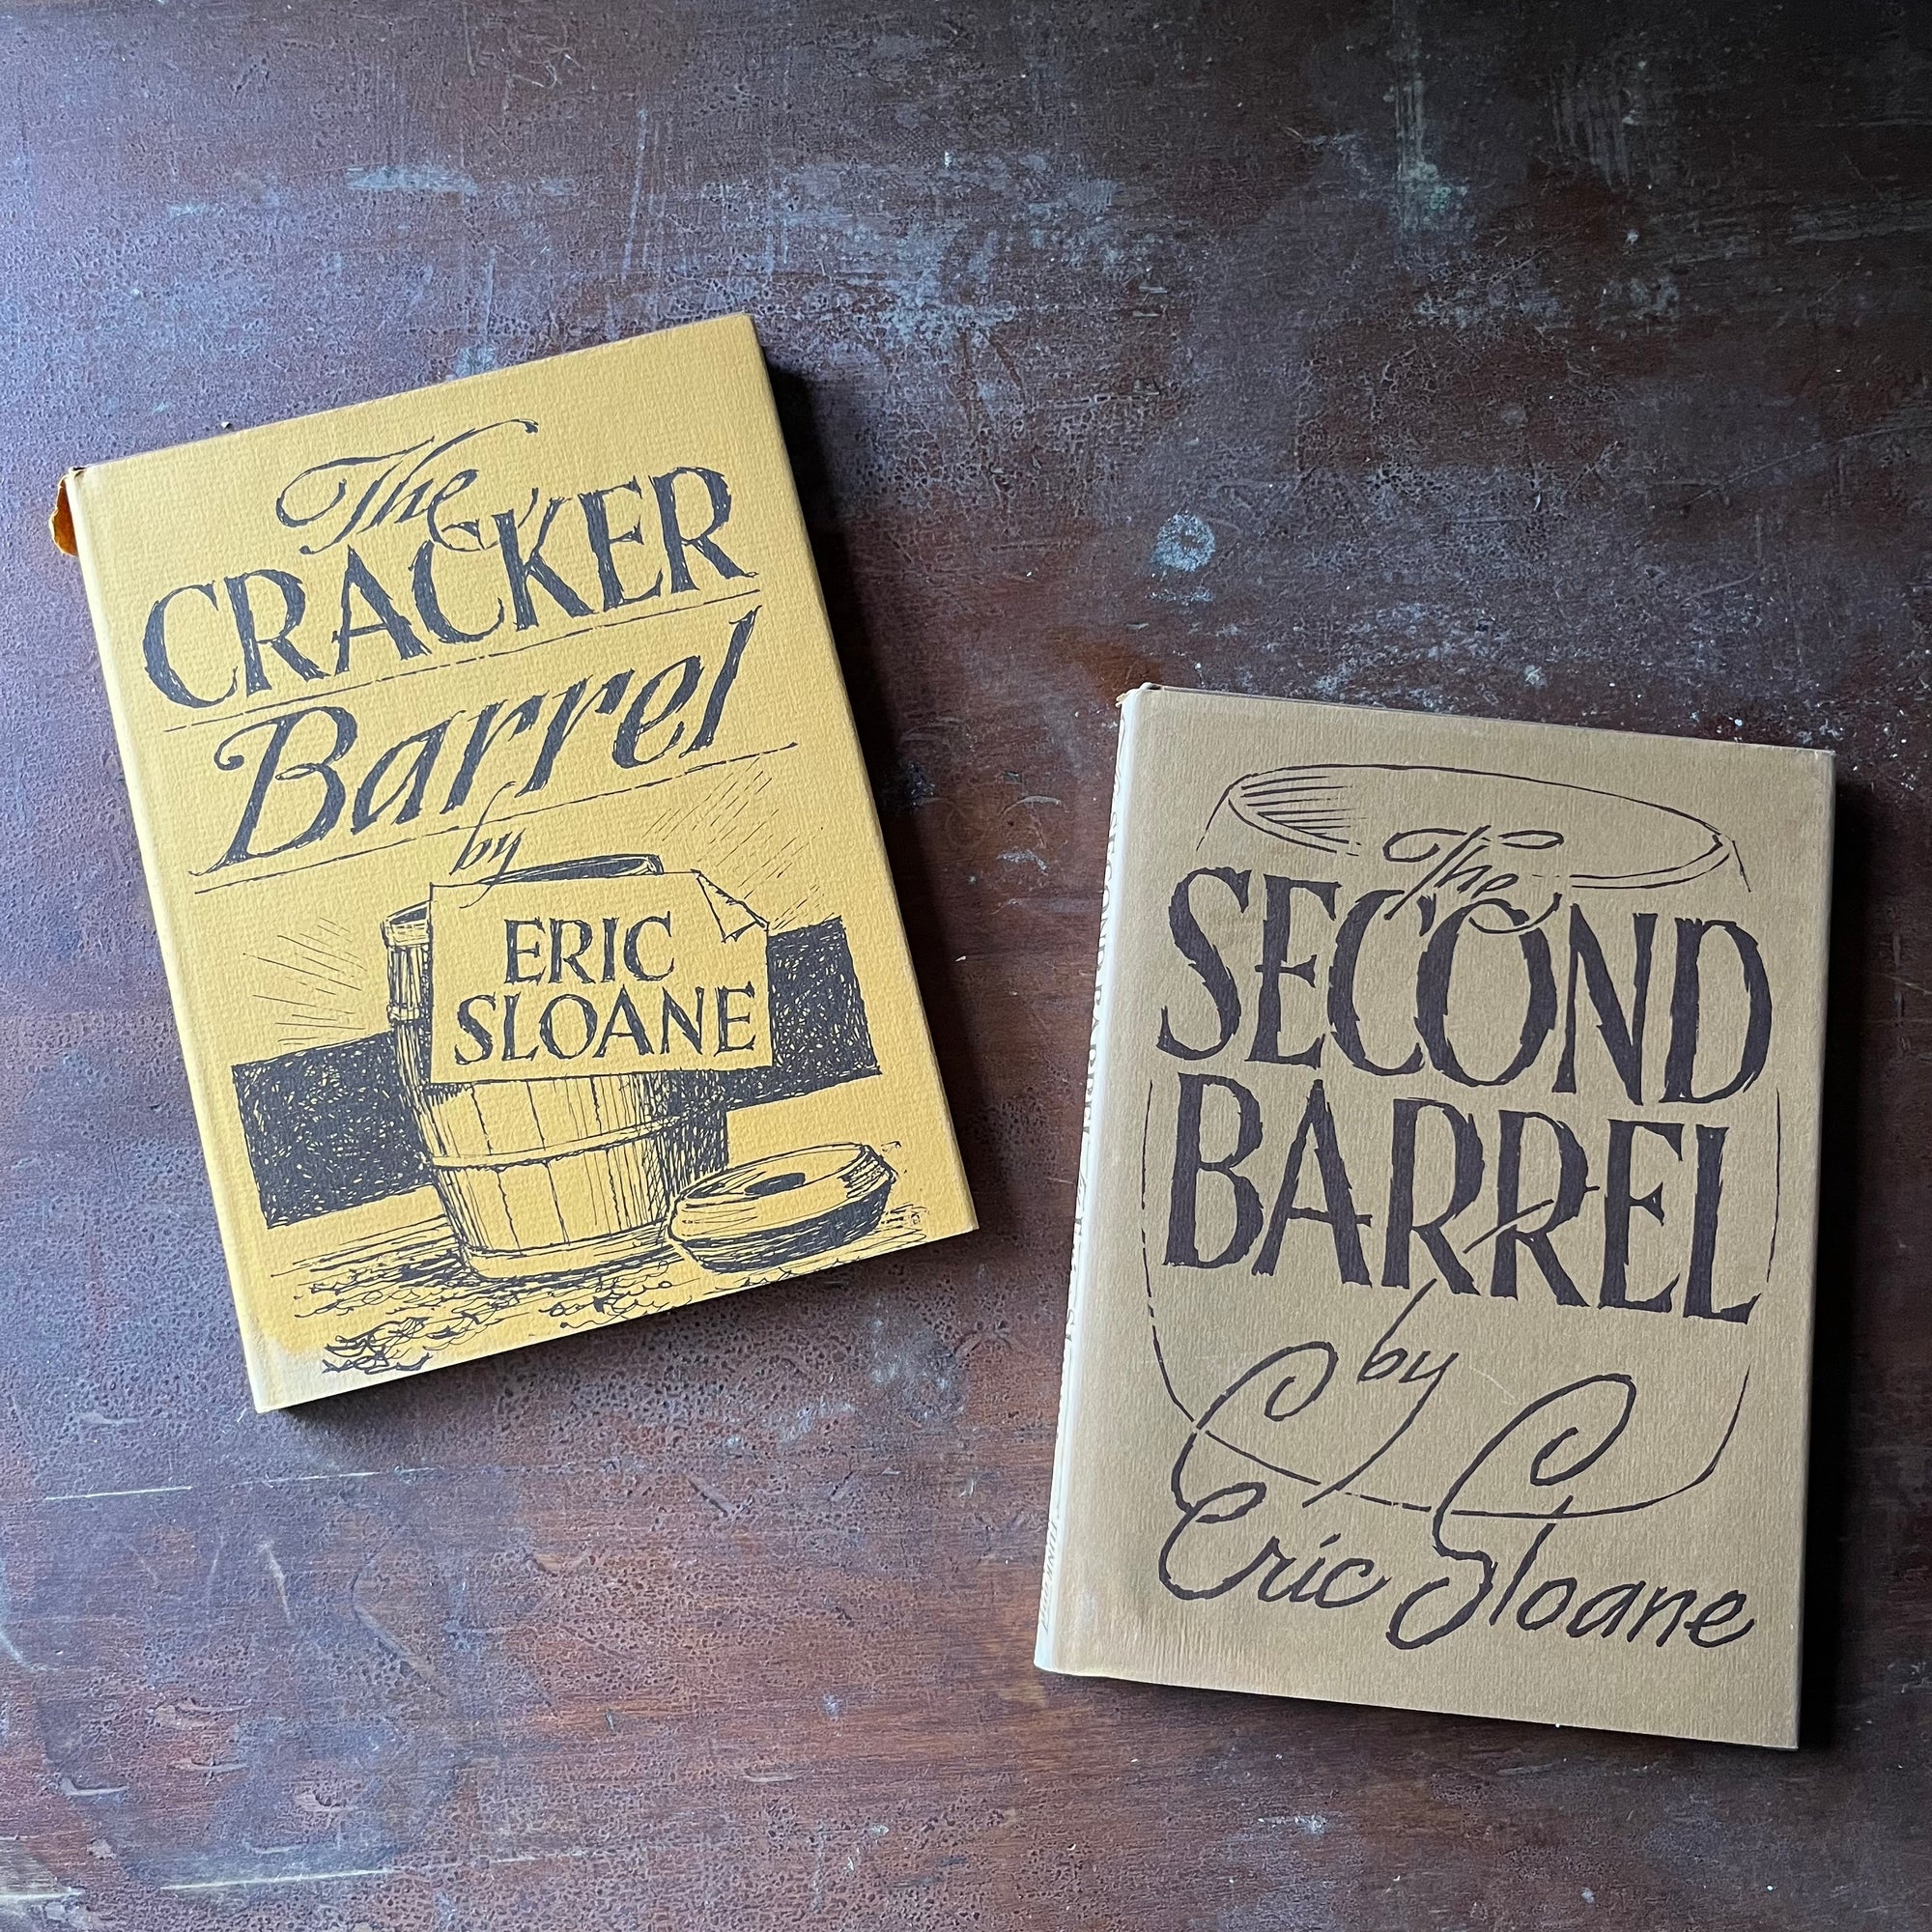 vintage American history Books, American Illustrator, Iconic American History - The Cracker Barrel and The Second Barrel written & Illustrated by Eric Sloane - view of the dust jacket's front covers